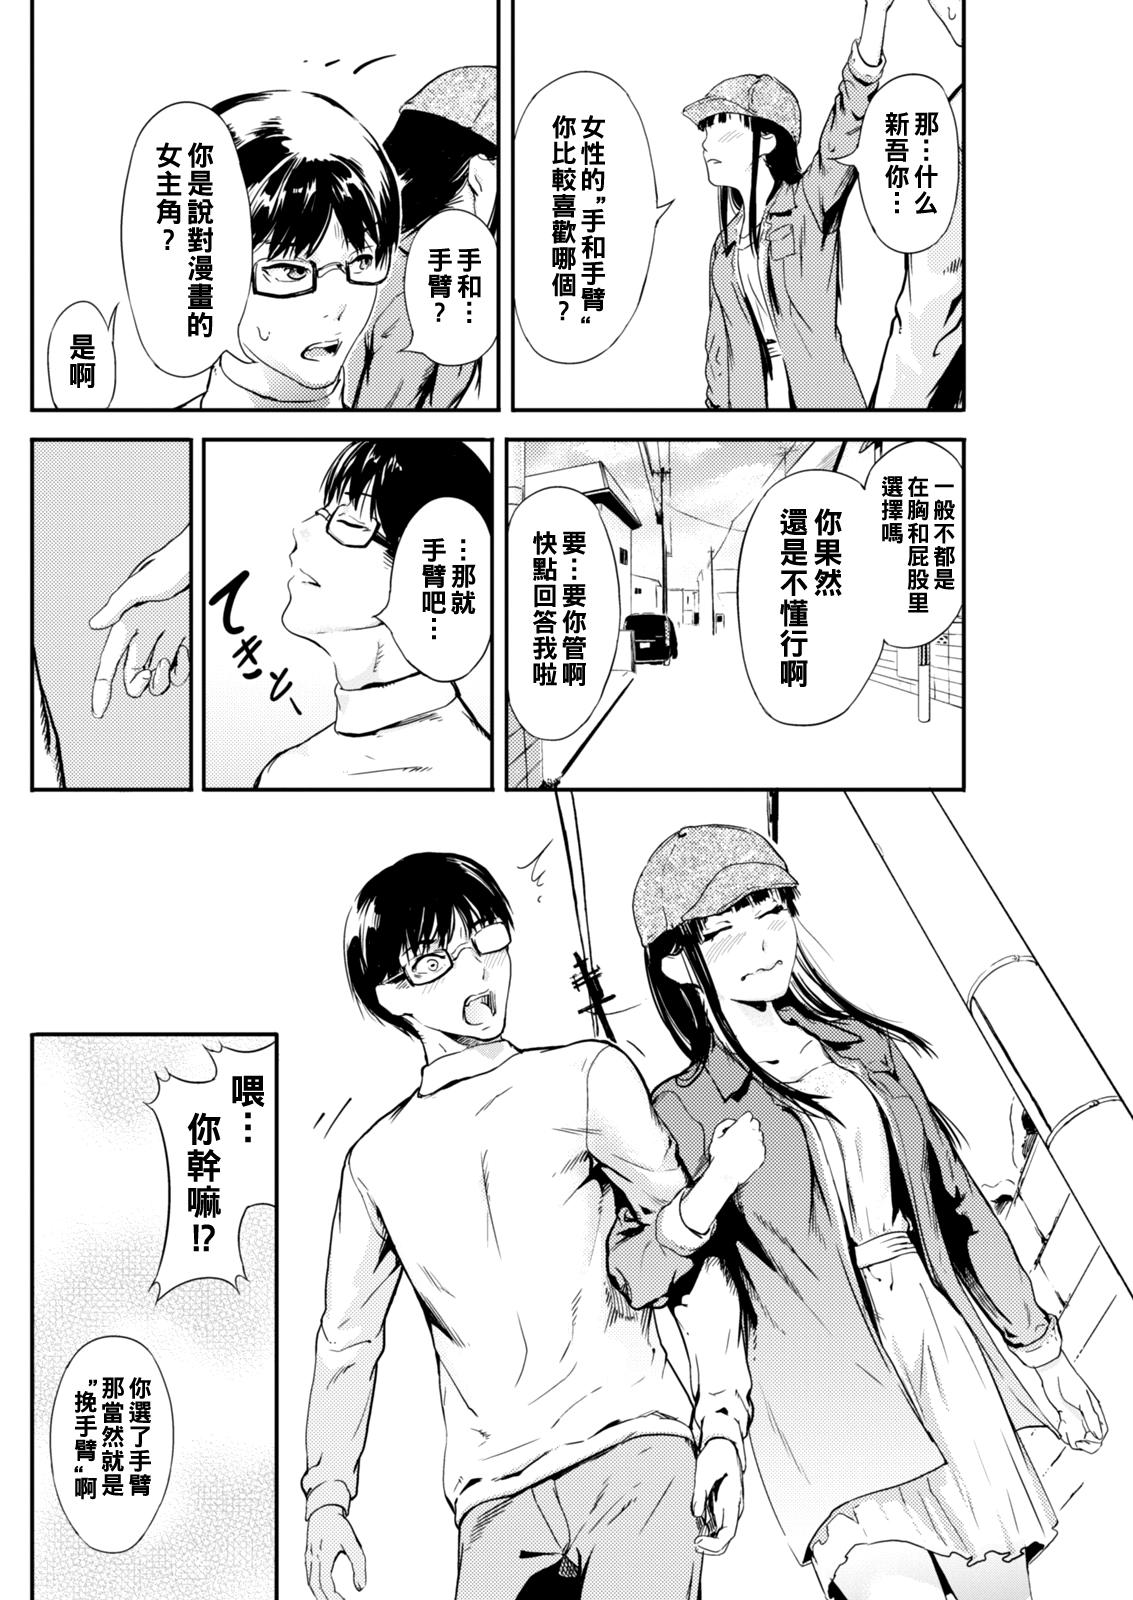 Anal Play 漫画ガール（Chinese） Tanned - Page 4